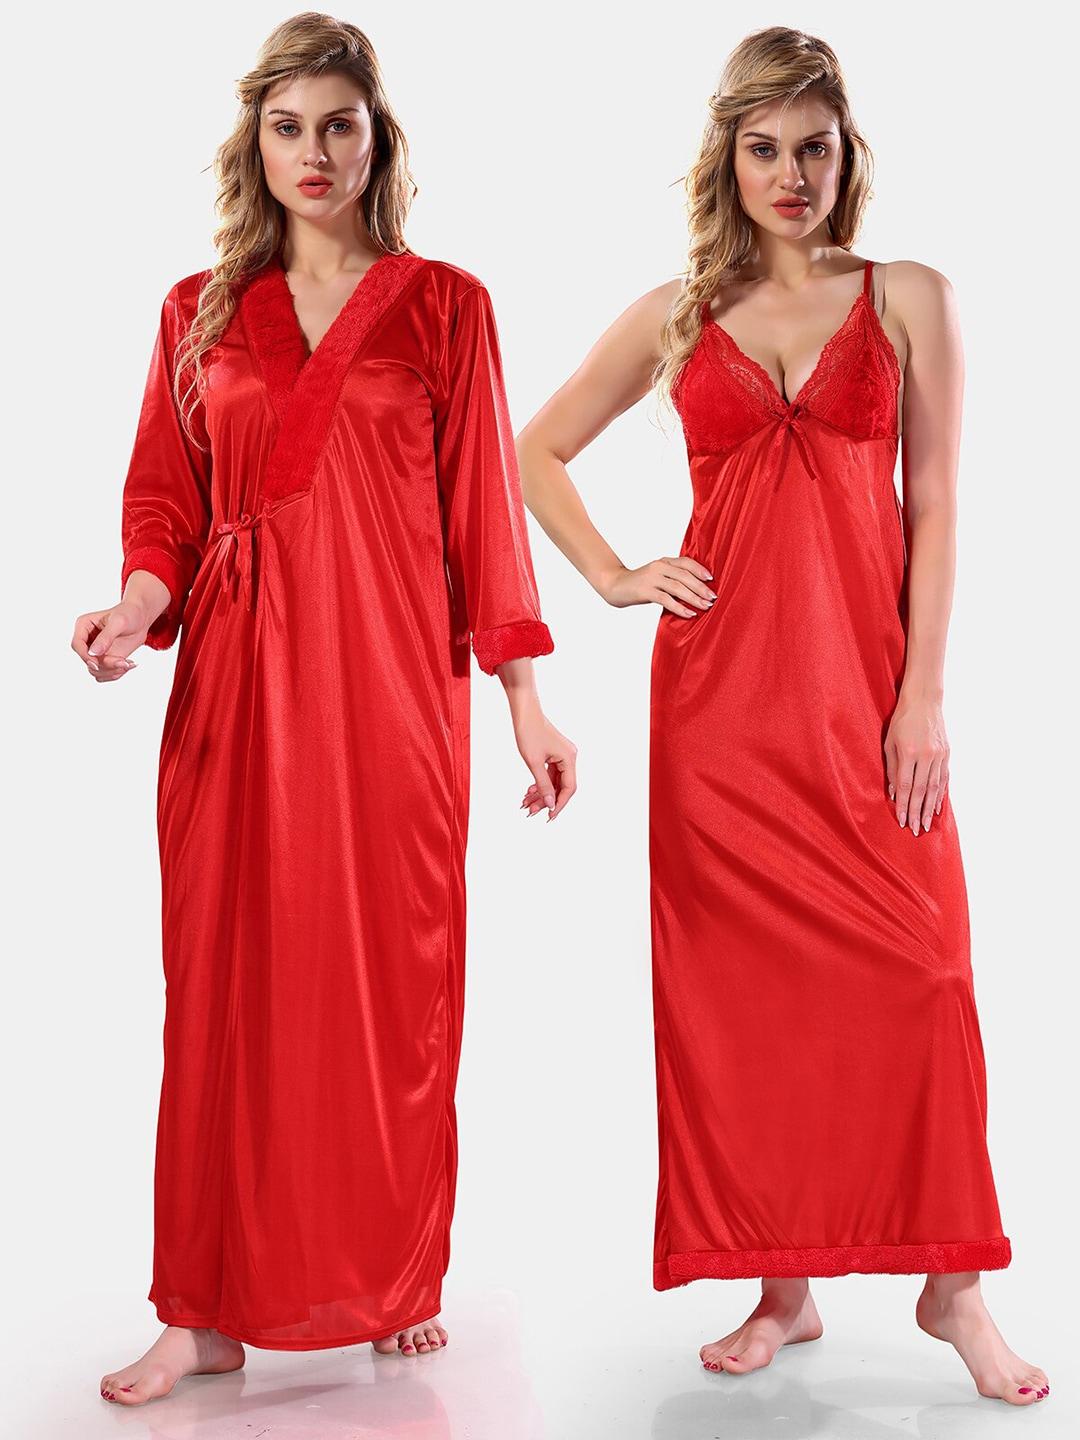 Be You V Neck Lace Up Details Satin Maxi Nightdress With Robe